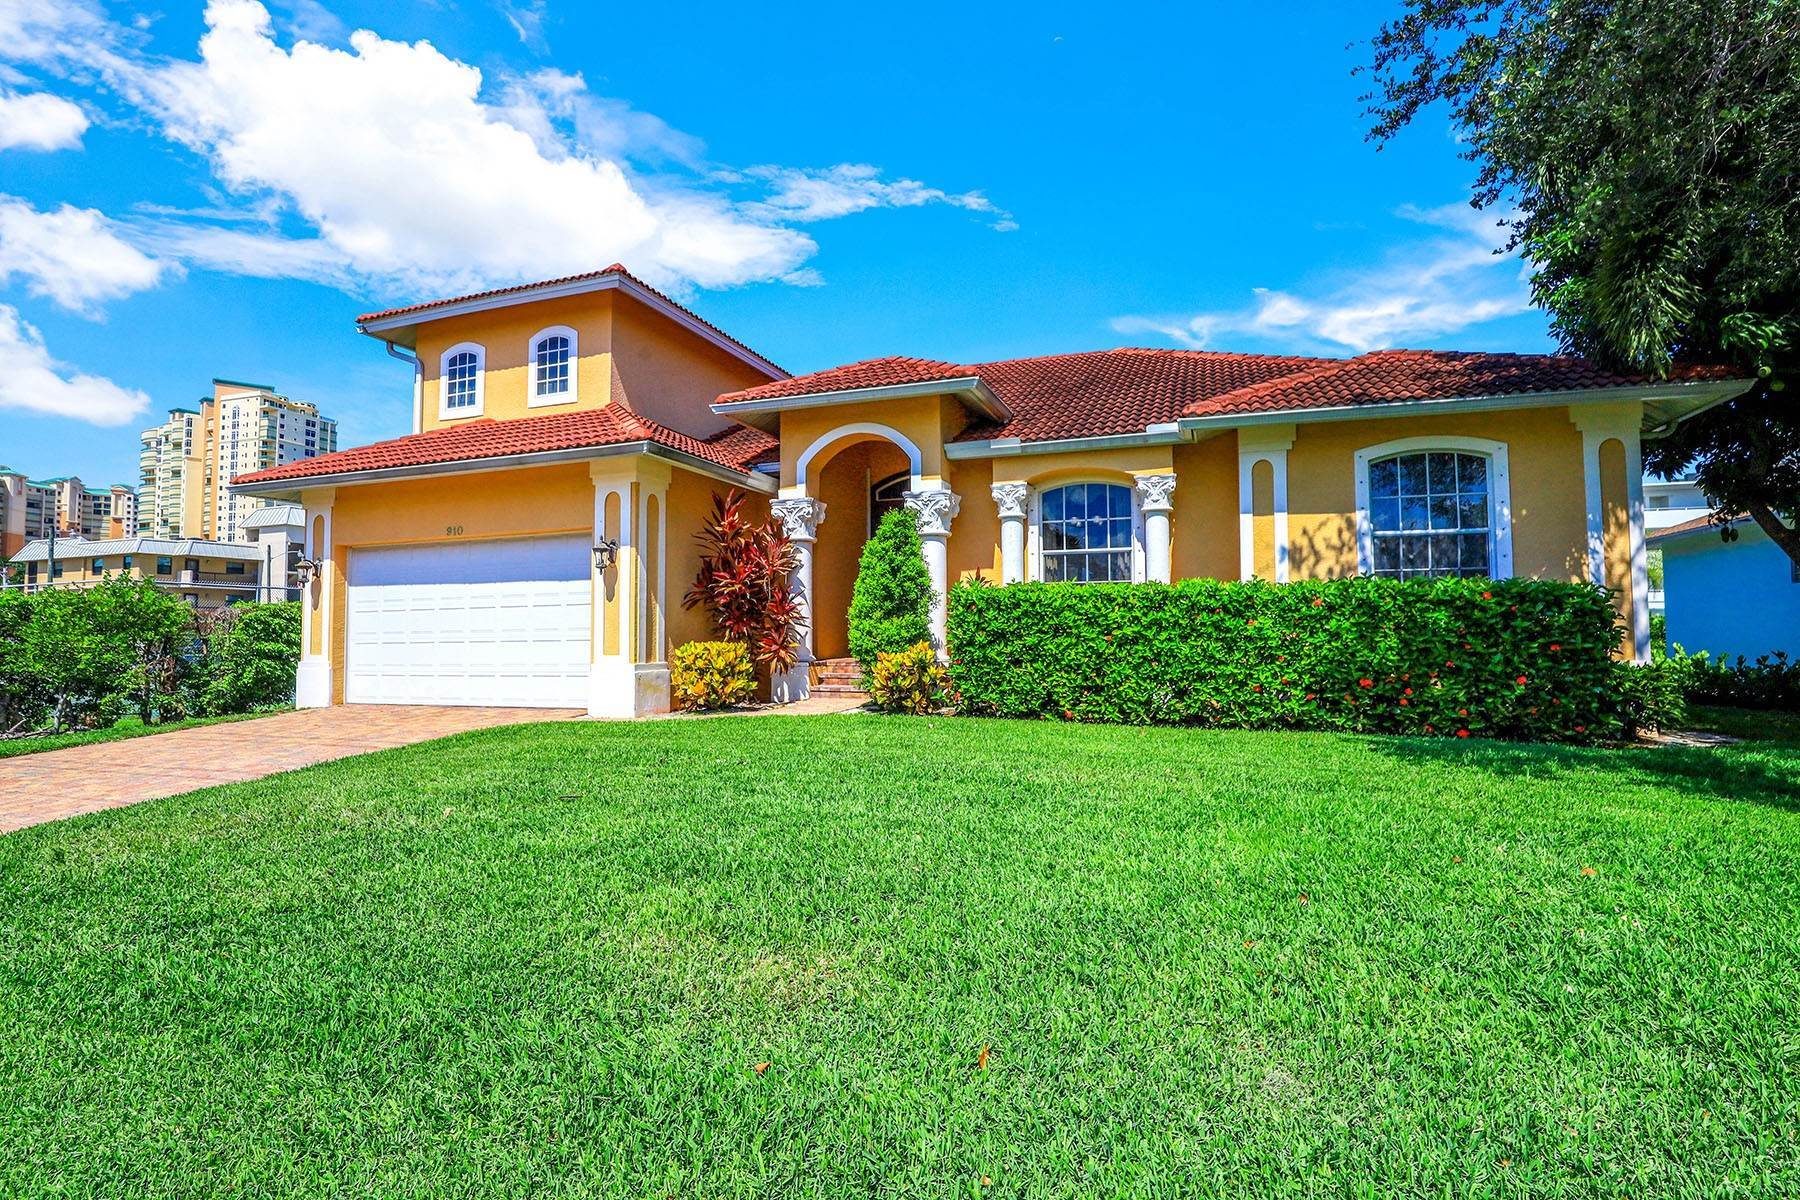 Single Family Homes for Sale at MARCO ISLAND 910 Seagrape Drive Marco Island, Florida 34145 United States